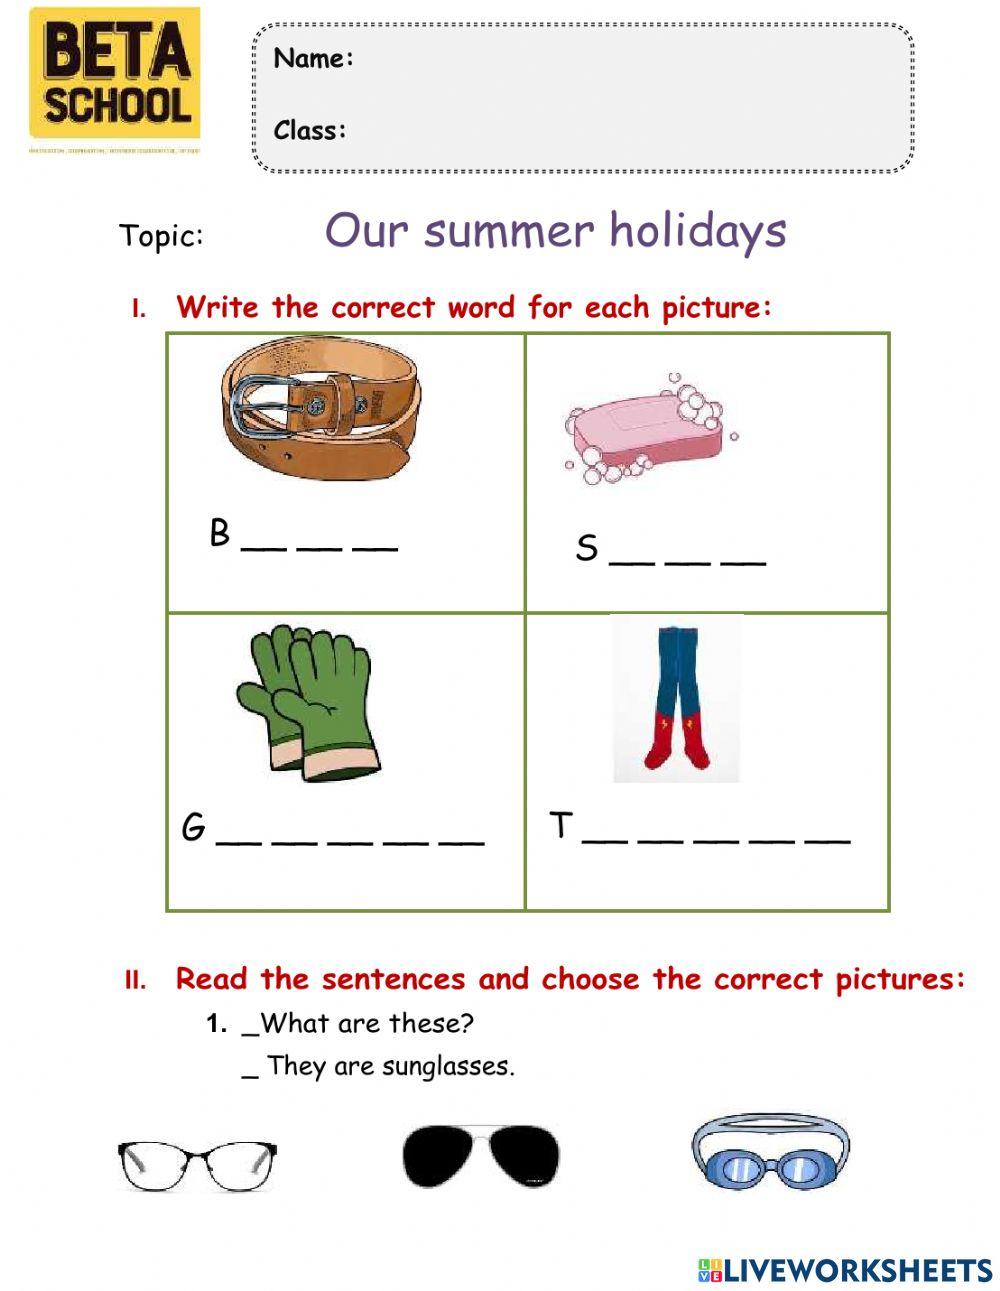 Topic - Our summer holidays - BE3A